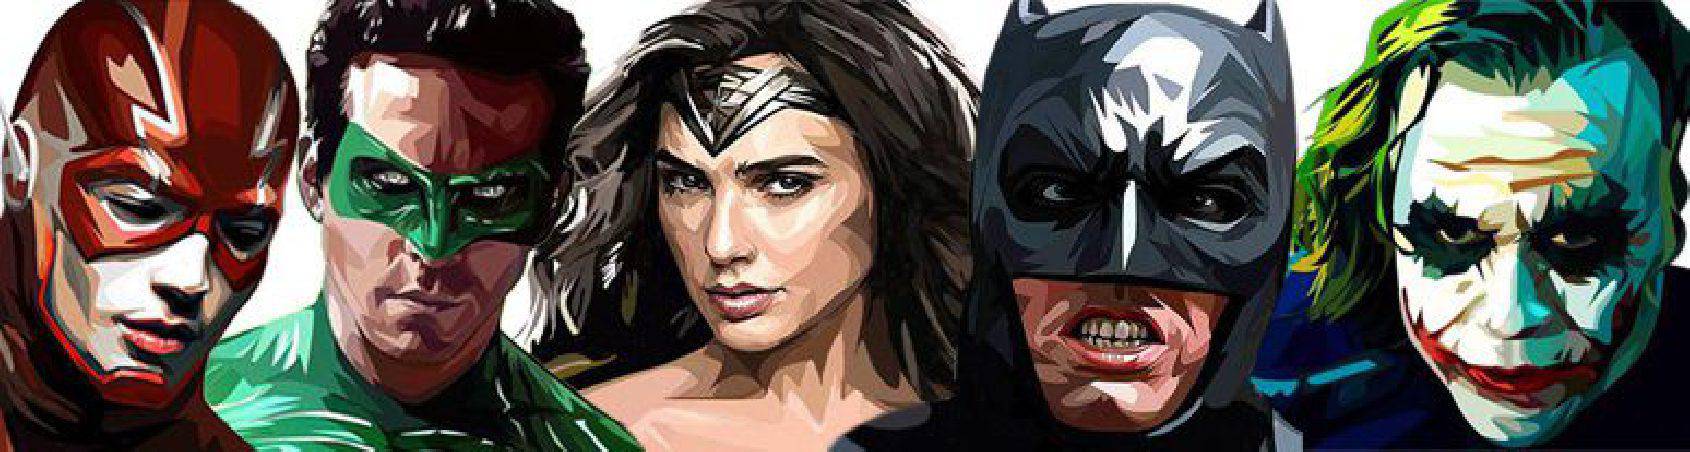 DC-Comics characters | Pop-Art style paintings to decorate